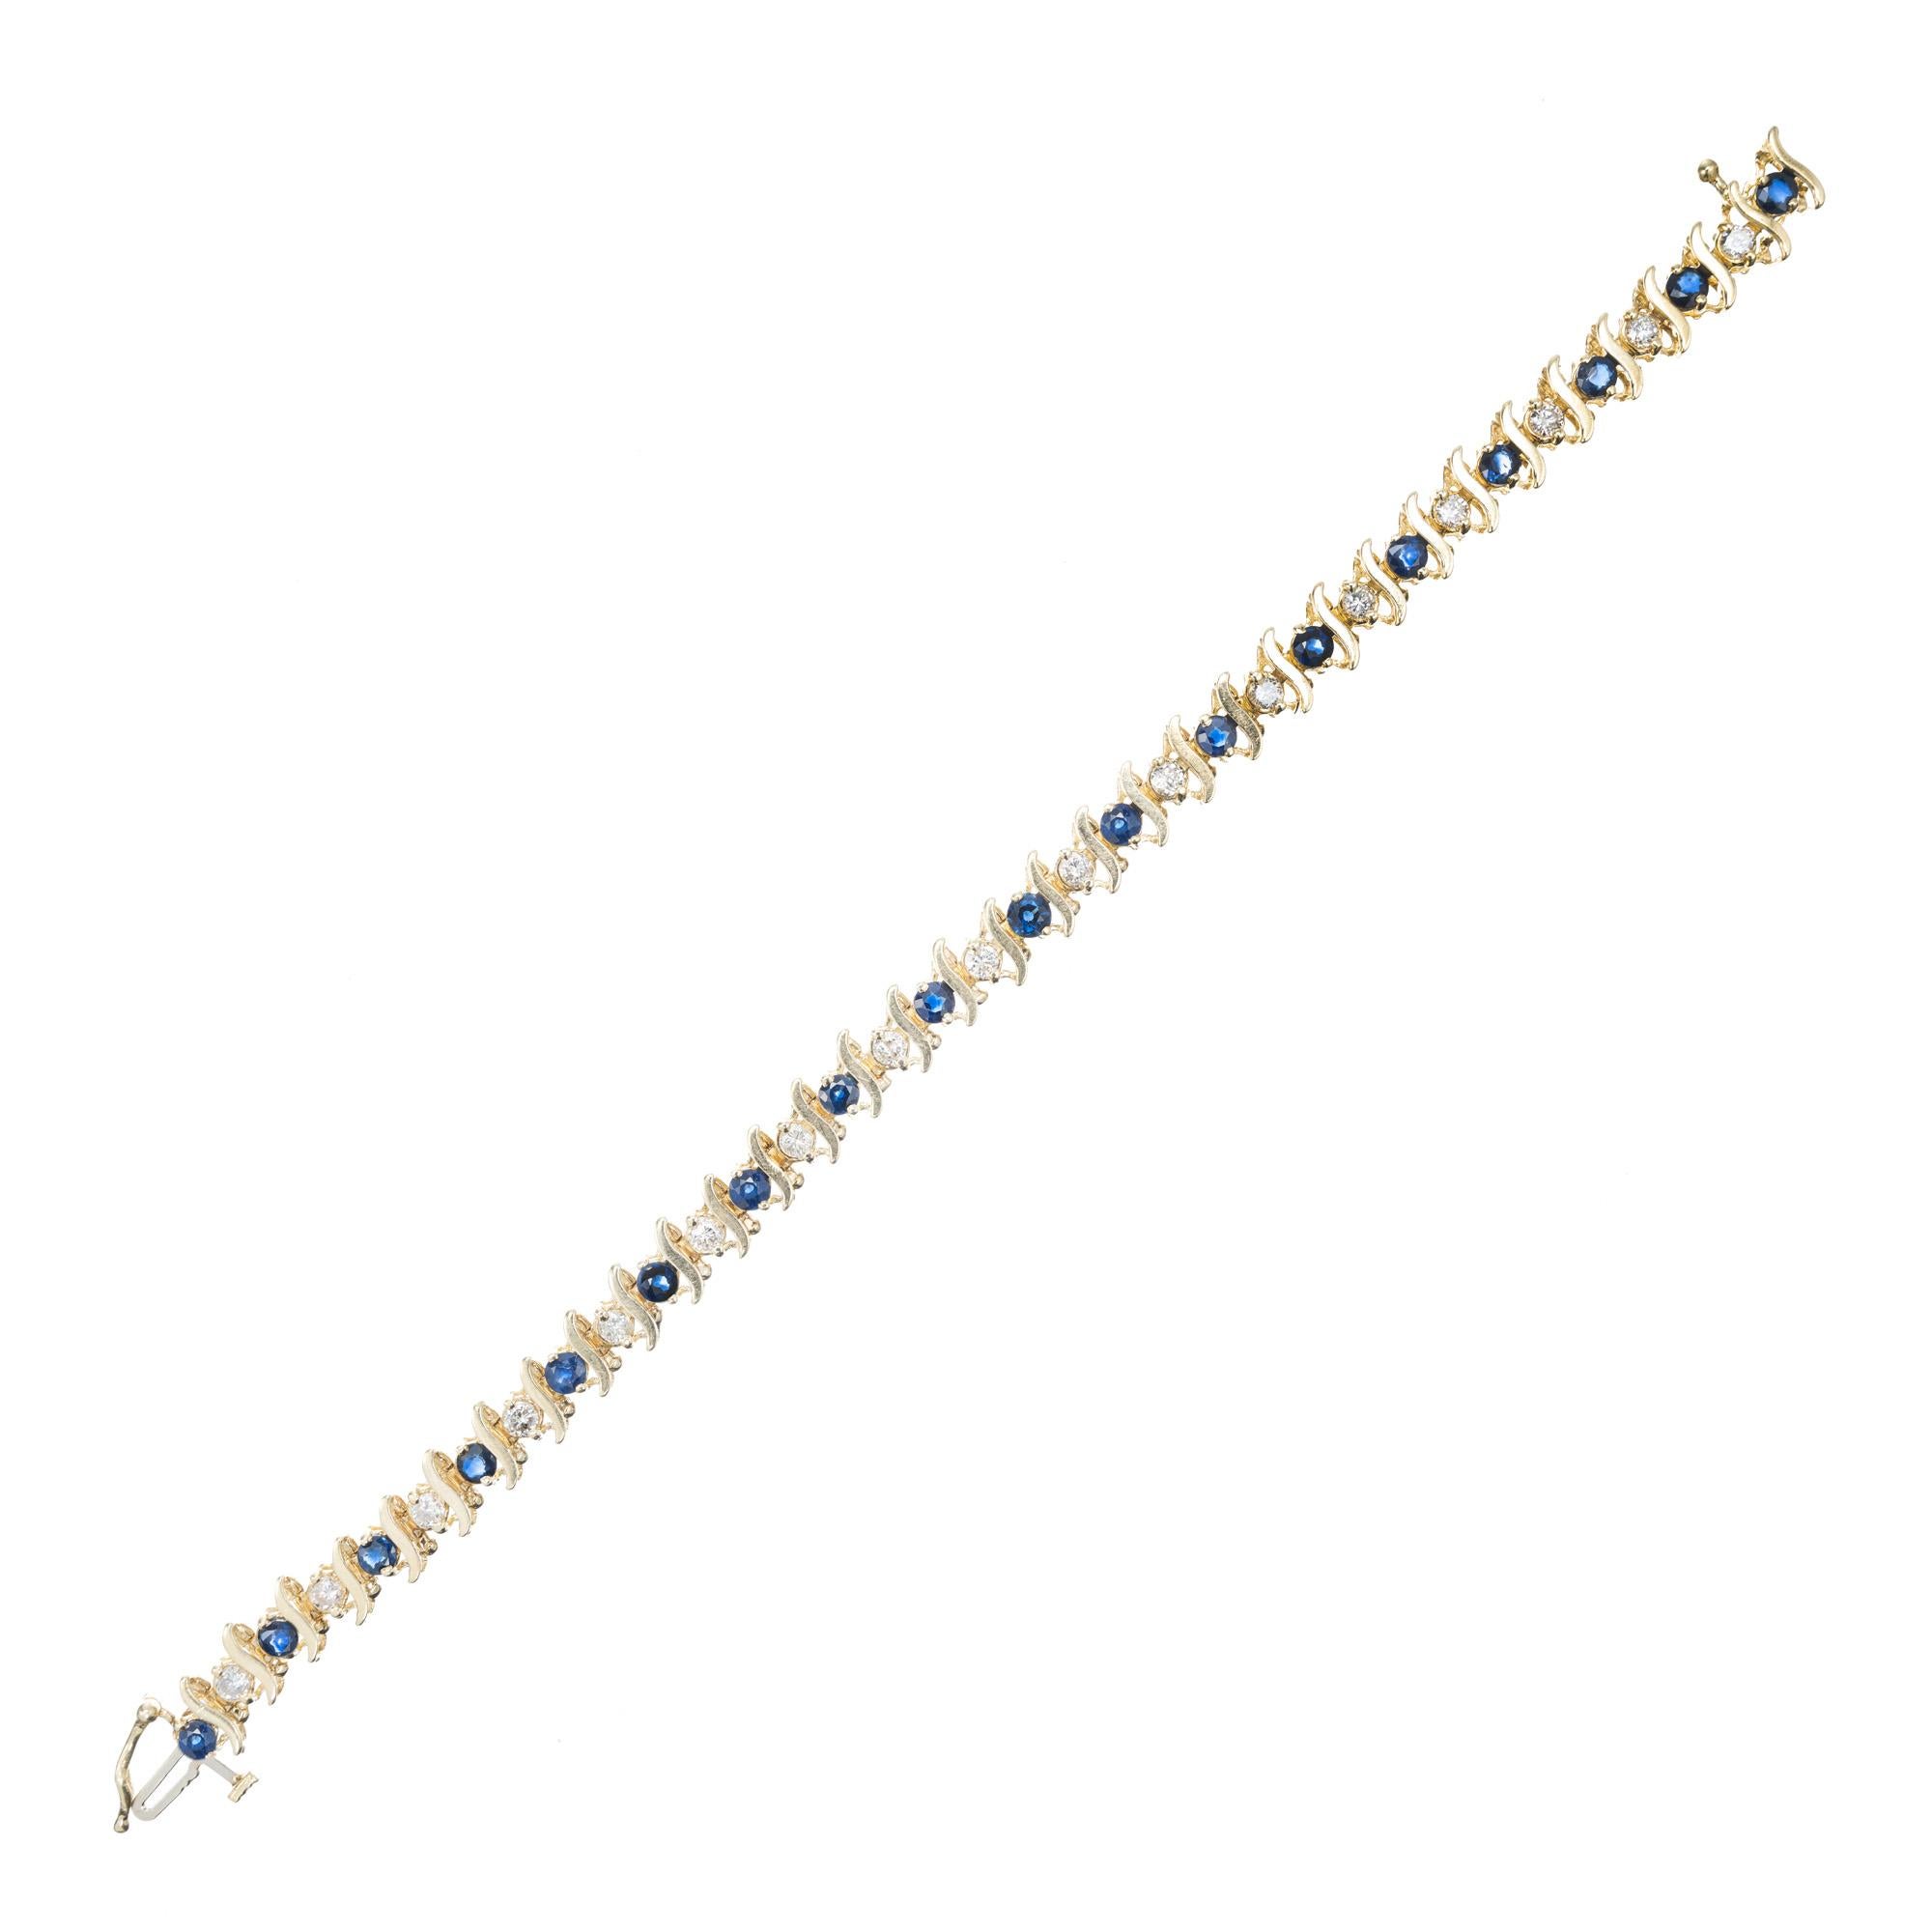 2.55 Carat Round Sapphire Diamond Yellow Gold S Link Bracelet  In Good Condition For Sale In Stamford, CT